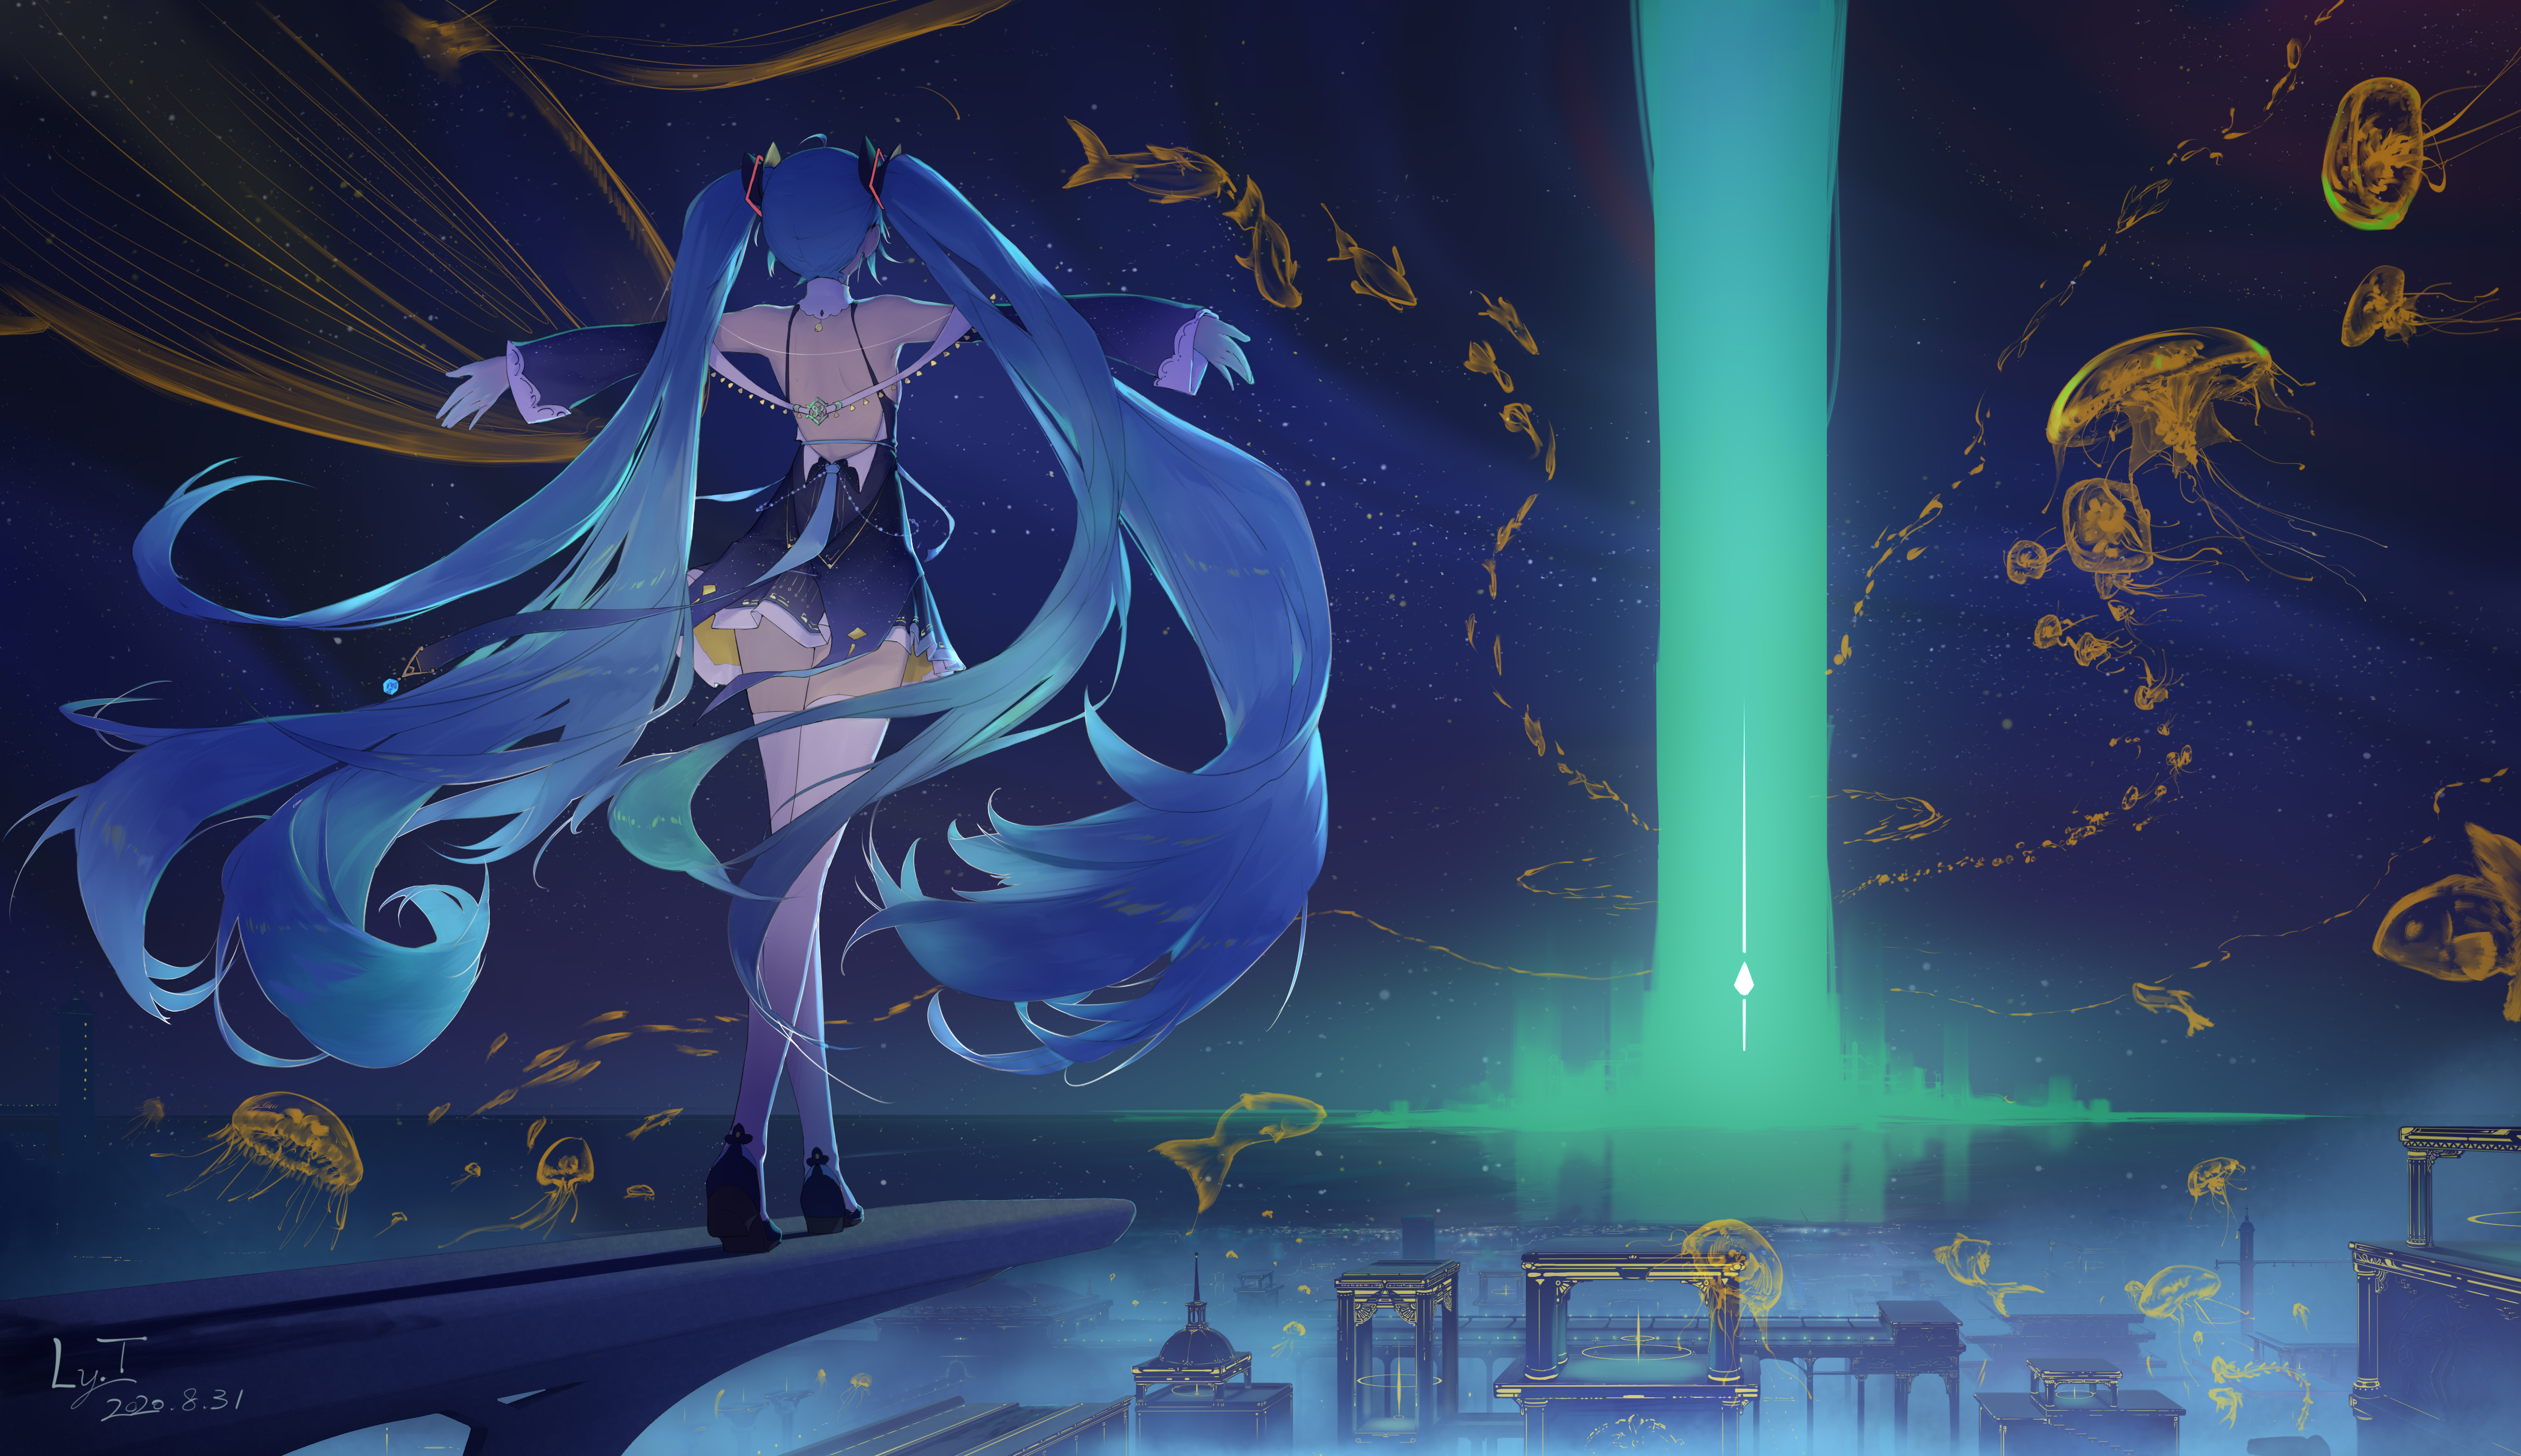 Anime 4674x2700 anime anime girls Pixiv Ly.T sky Hatsune Miku Vocaloid long hair twintails blue hair walking jellyfish signature animals fish dress white stockings stockings frills flying whales whale open arms